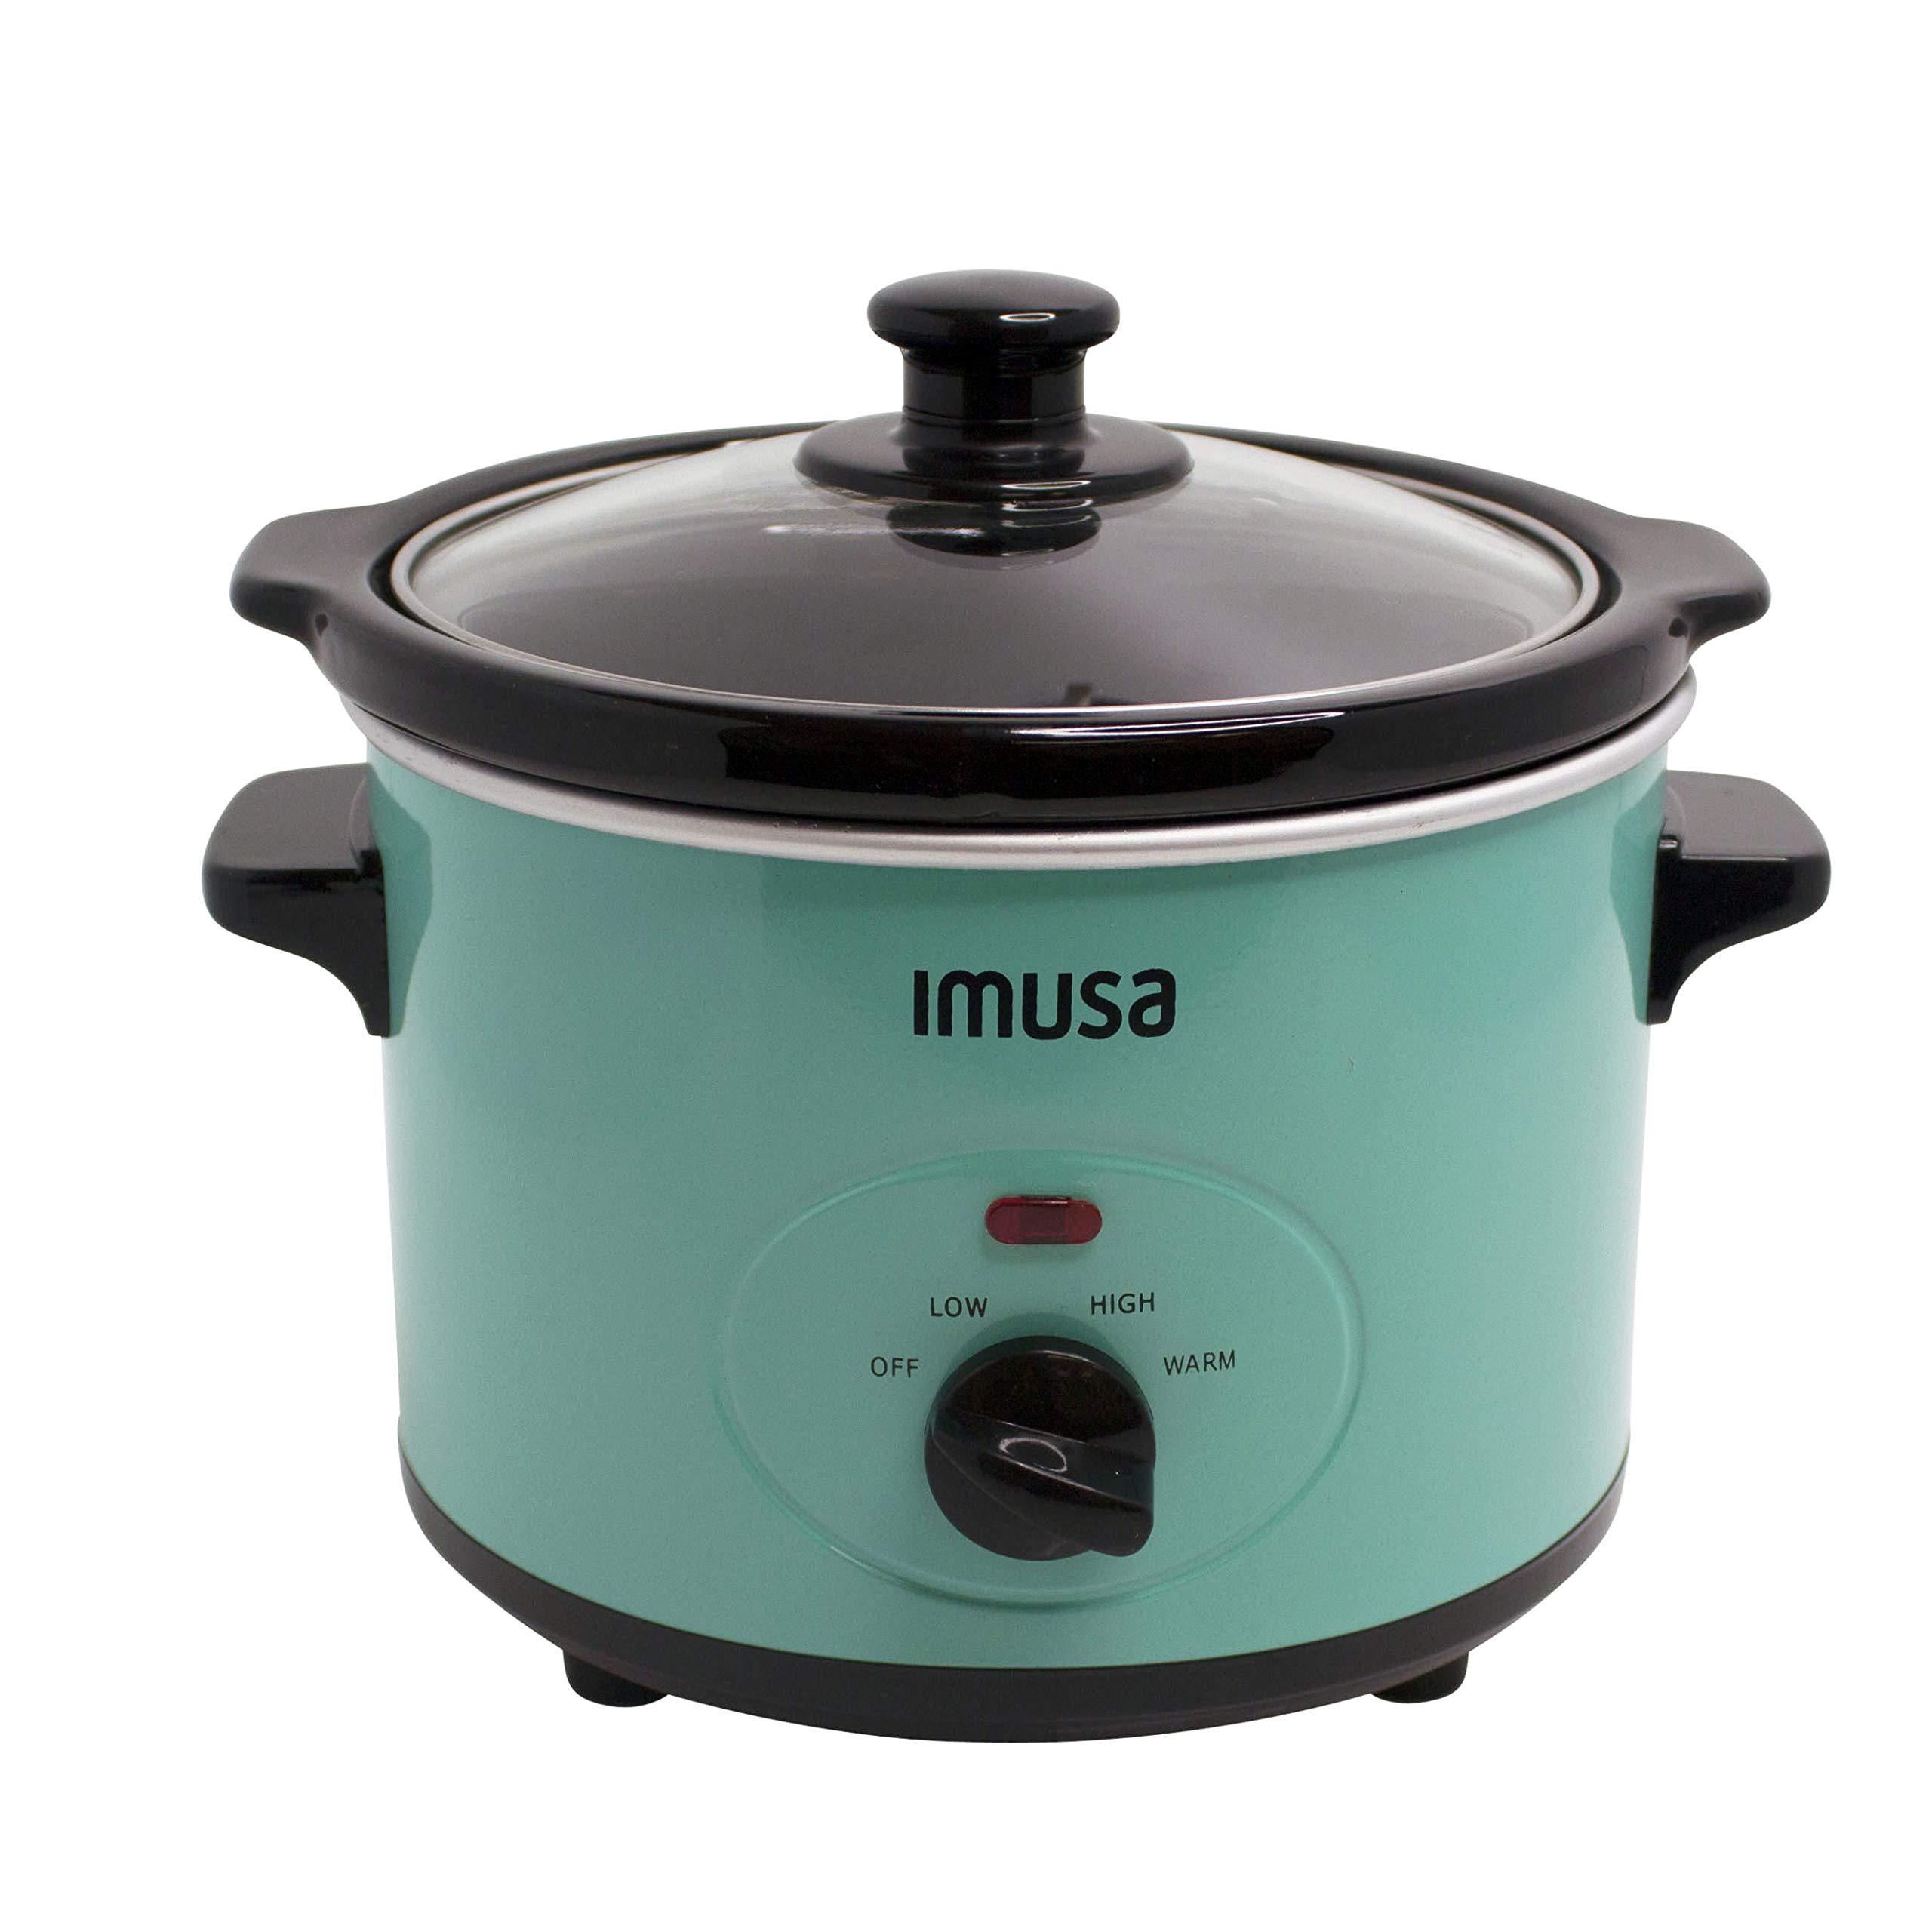 IMUSA Teal Slow Cooker